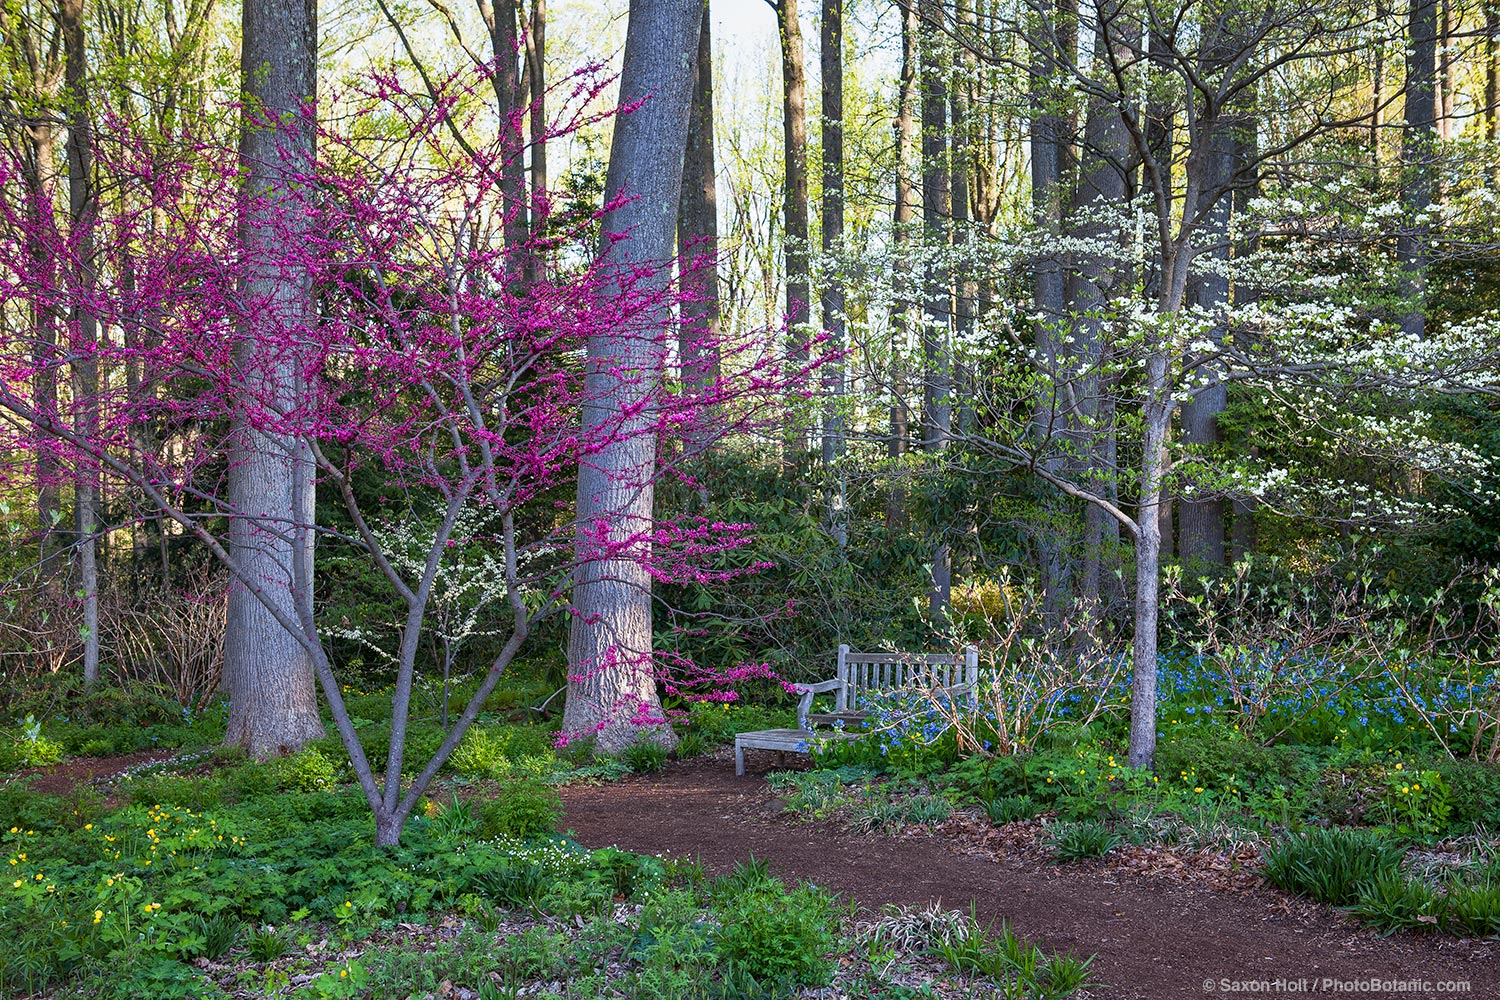 Redbud tree (Cercis canadensis) flowering by pathway to woodland garden of Liriodendron tulipifera -Tulip tree with white flowering dogwoods in spring at Mount Cuba Center